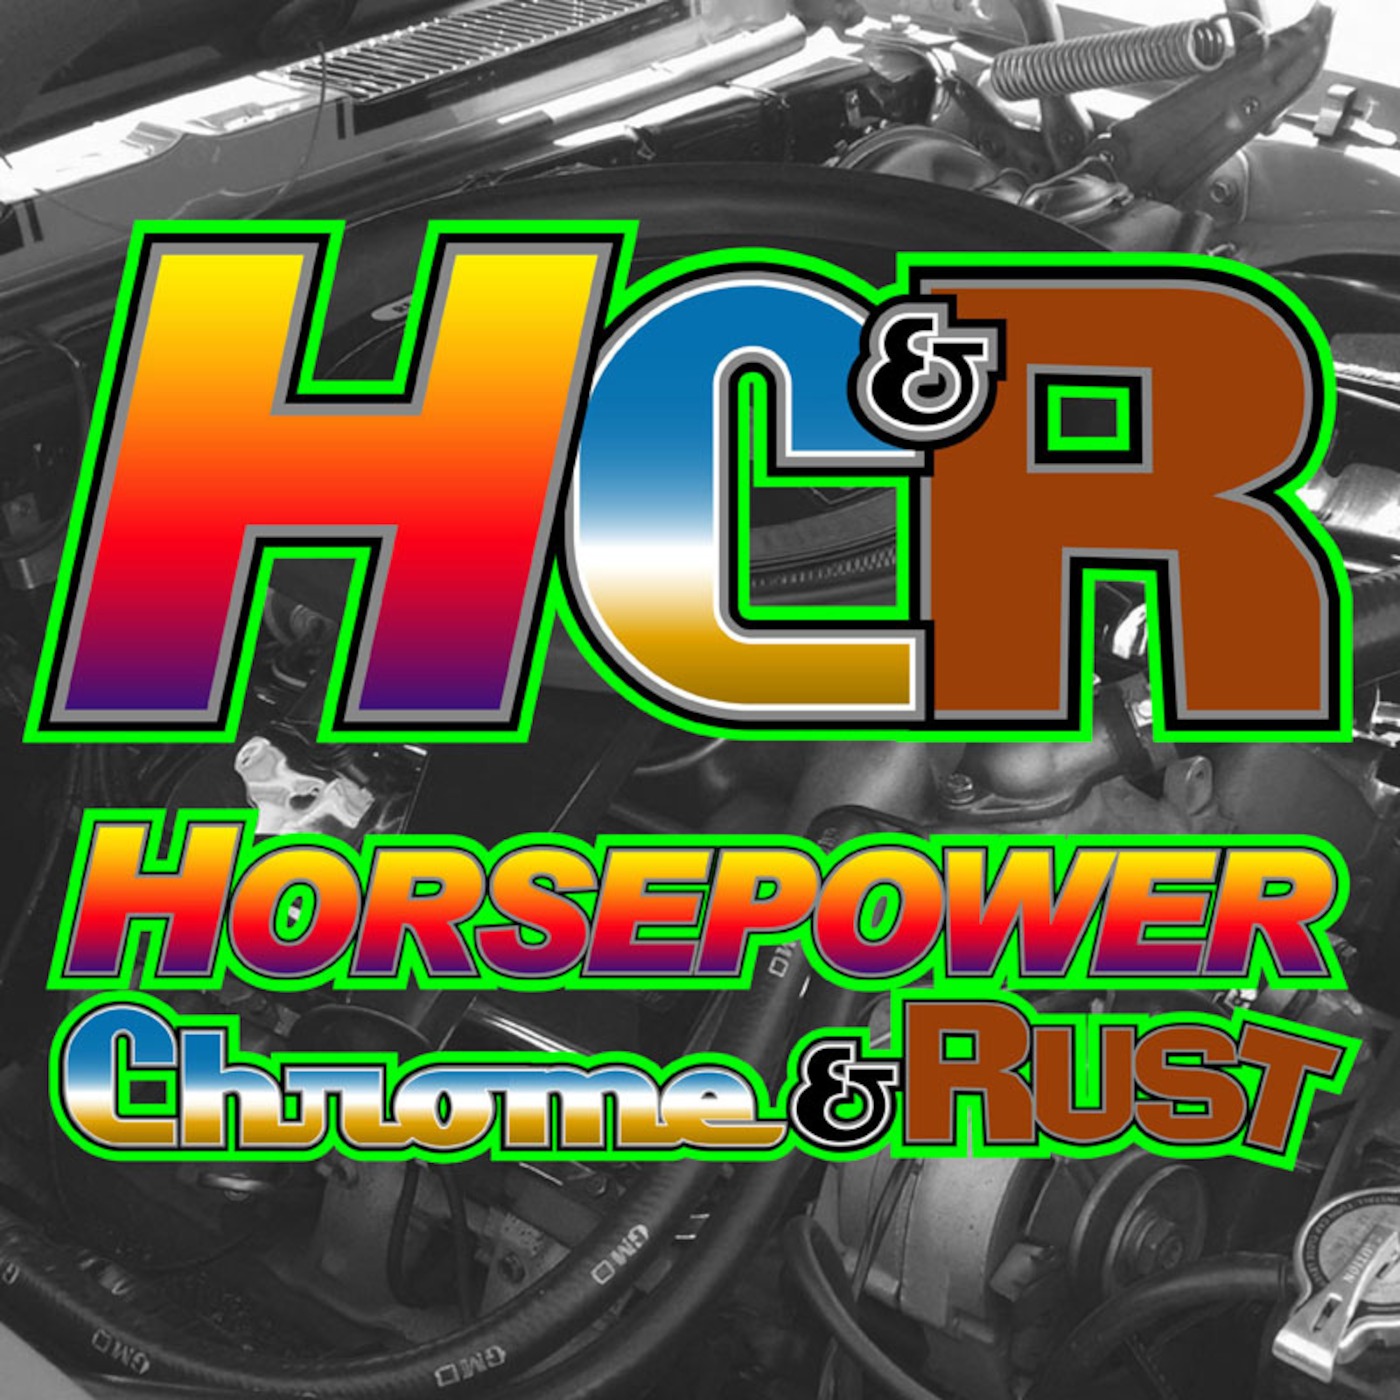 Horsepower Chrome and Rust EP88 Black Widow Bettie and Debbie Bodal interviews & More June 5 2019